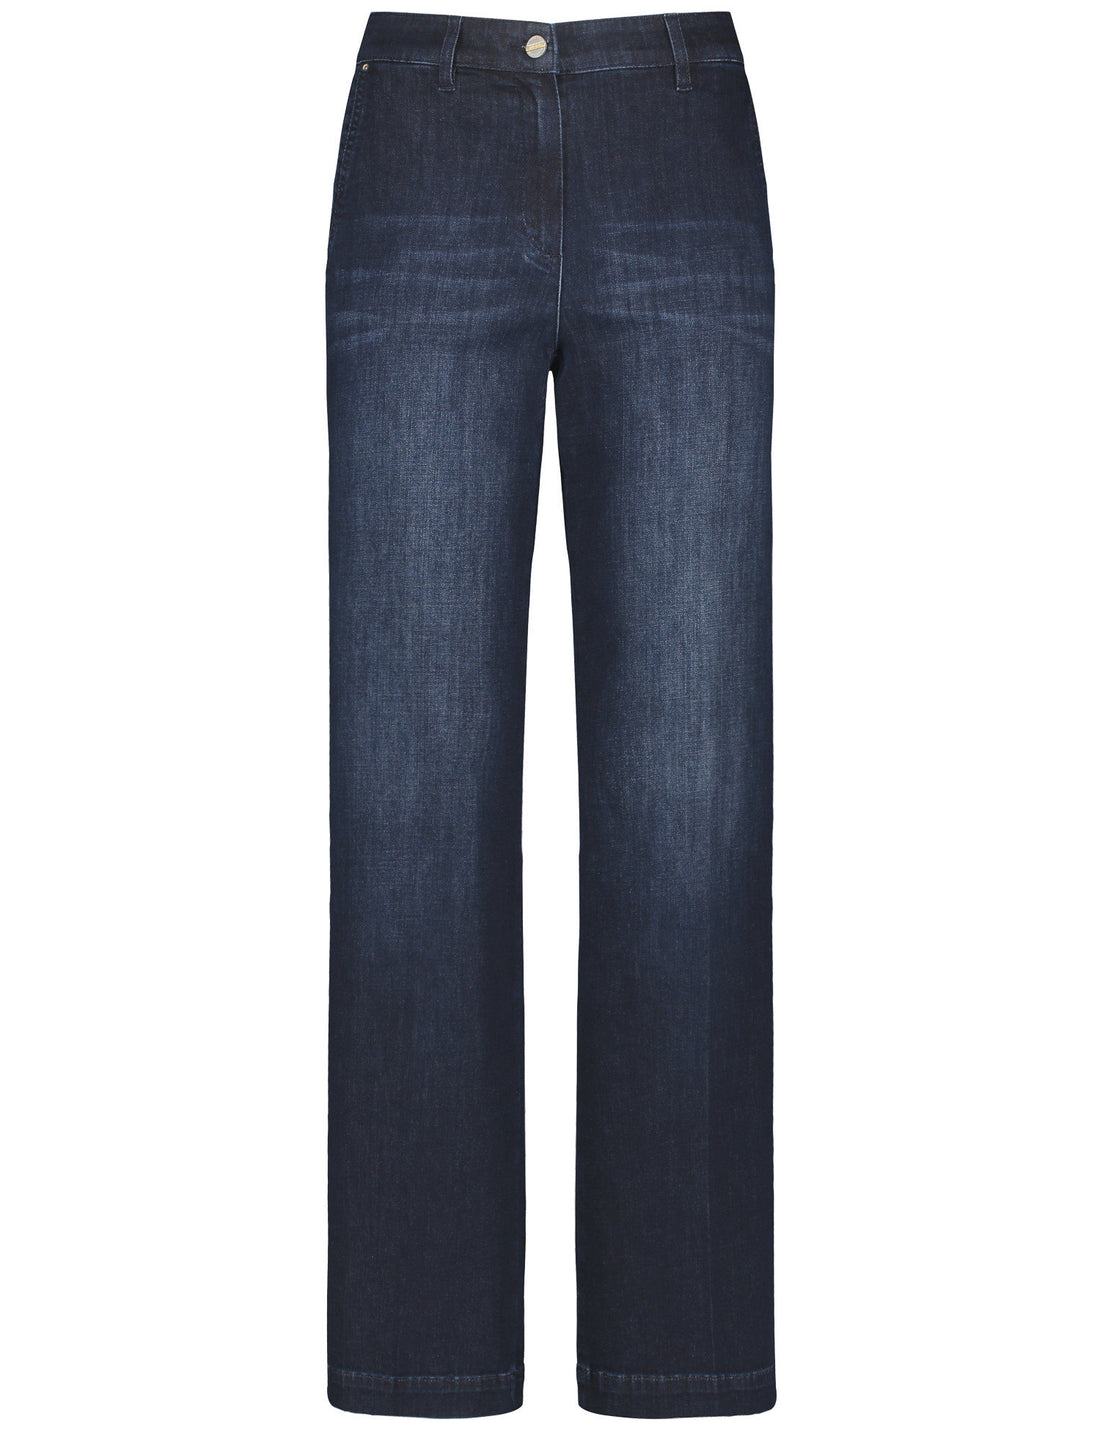 Jeans With A Wide Leg And Washed-Out Areas_320007-31631_830003_02